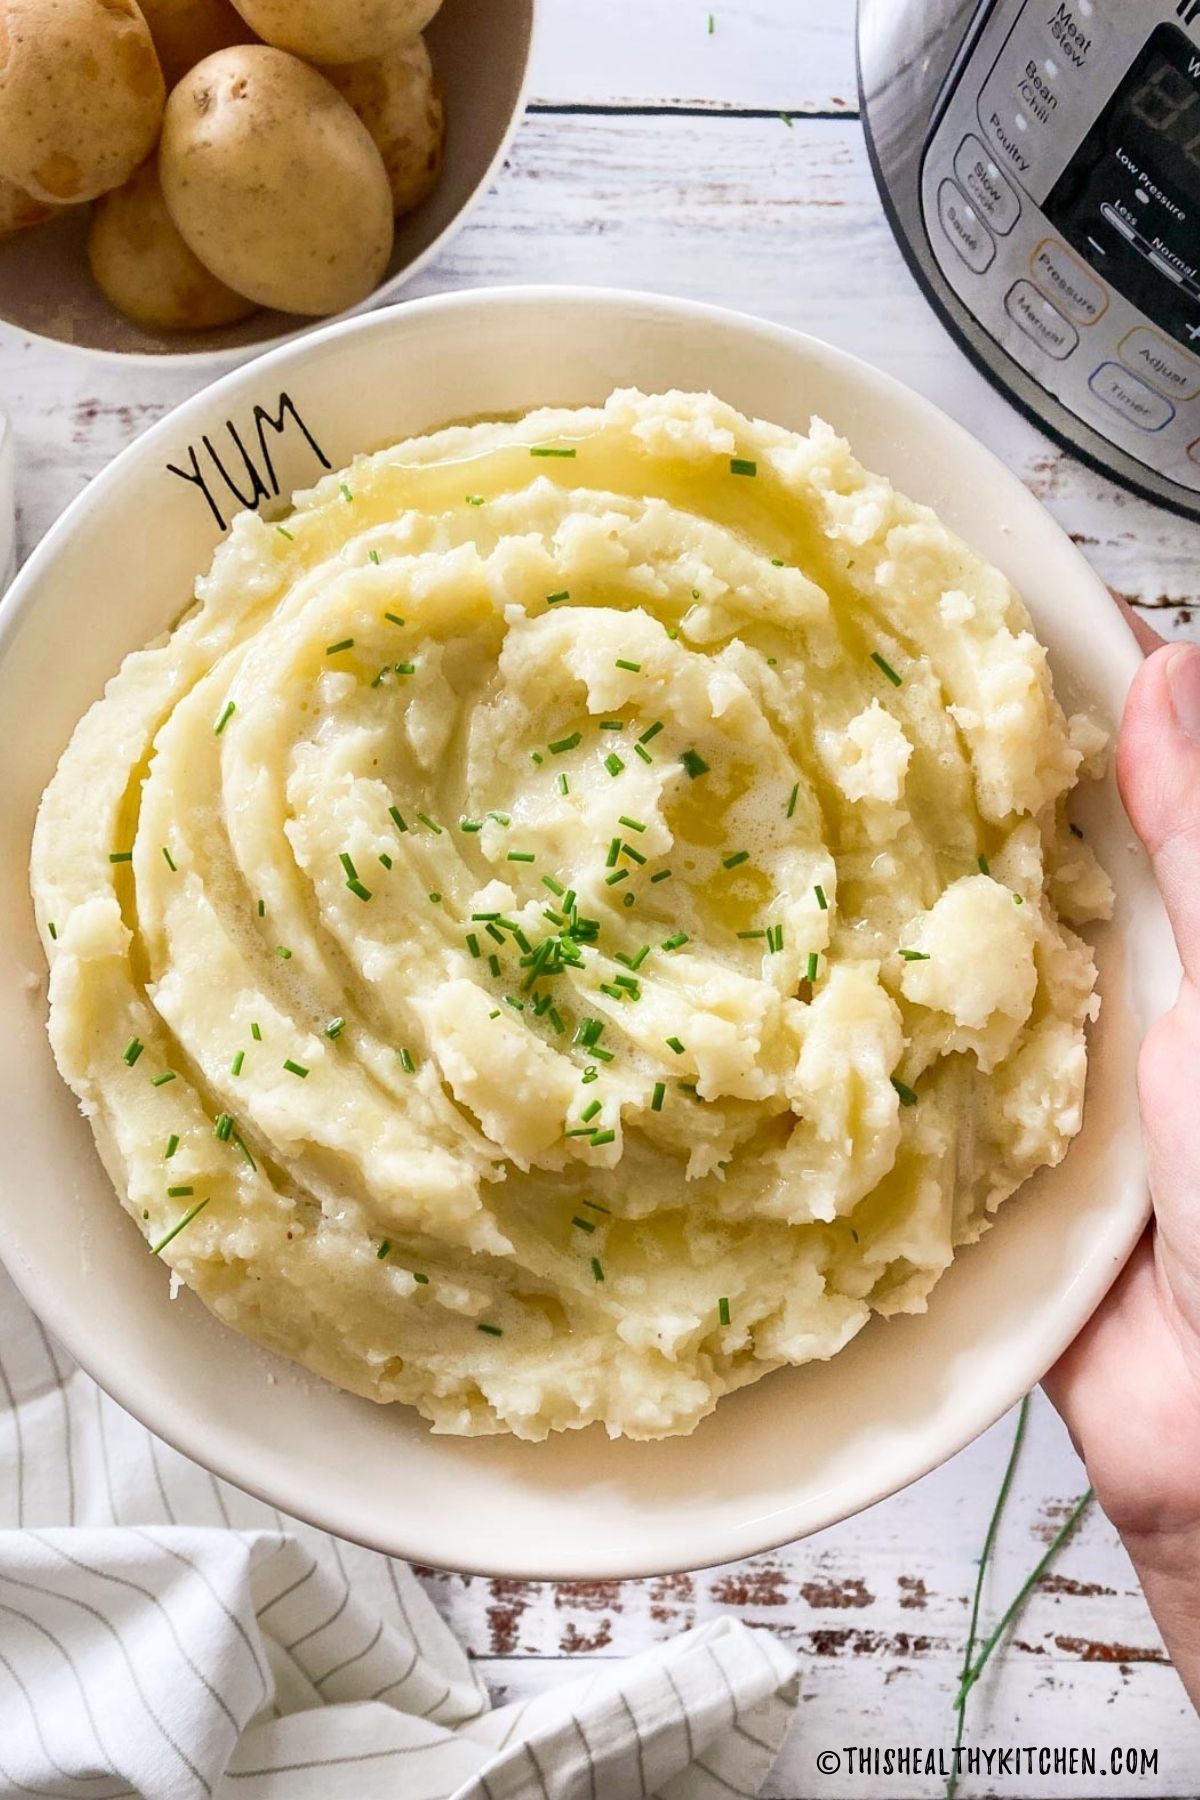 Hand holding up plate of mashed potatoes with chives on top.